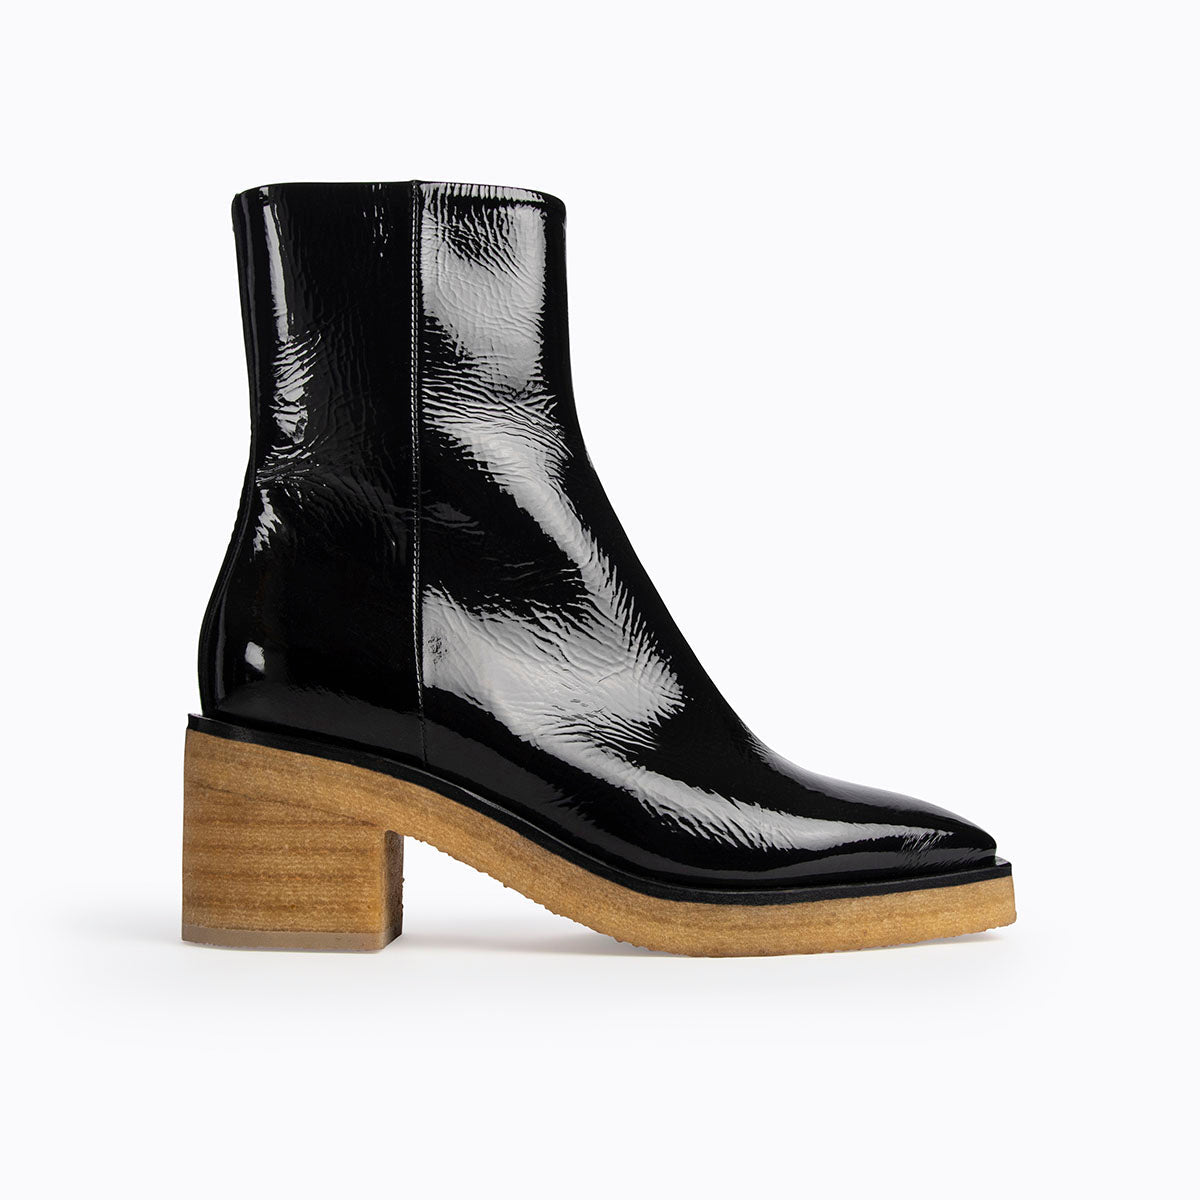 FOLK ankle boots for women in black patent leather — PIERRE HARDY